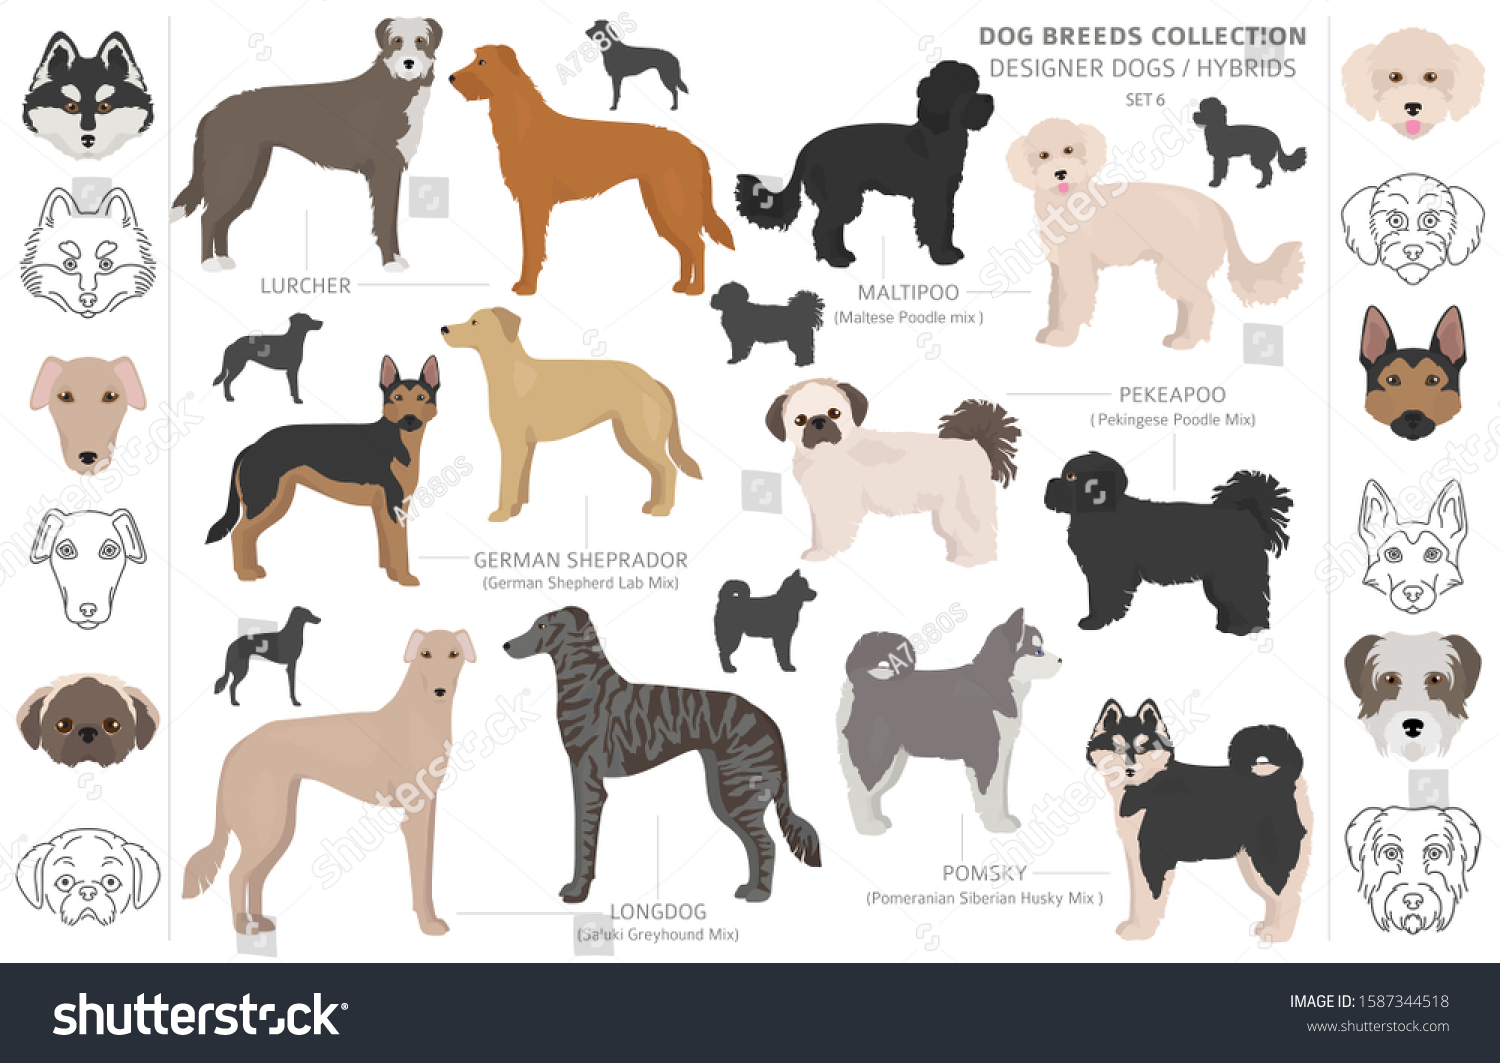 SVG of Designer dogs, crossbreed, hybrid mix pooches collection isolated on white. Flat style clipart dog set. Vector illustration svg